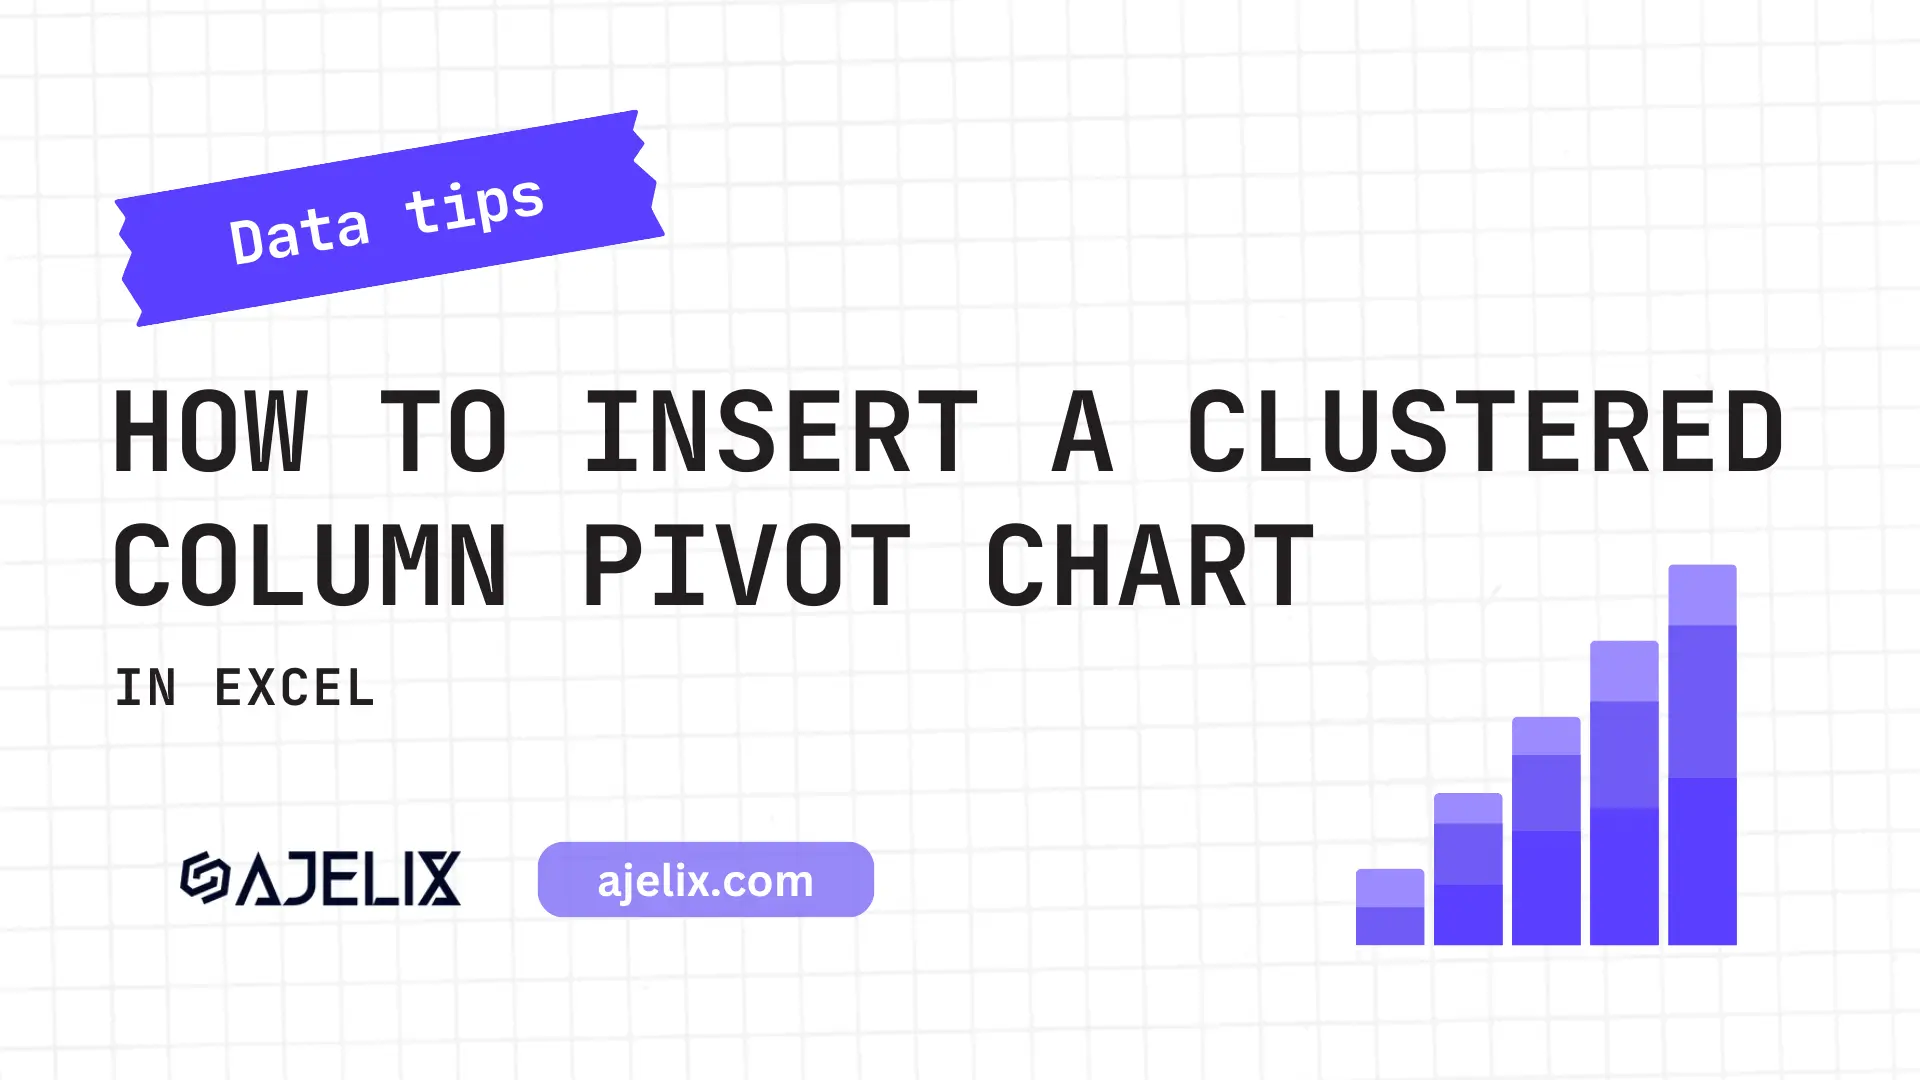 How to Insert a Clustered Column Pivot Chart in Excel